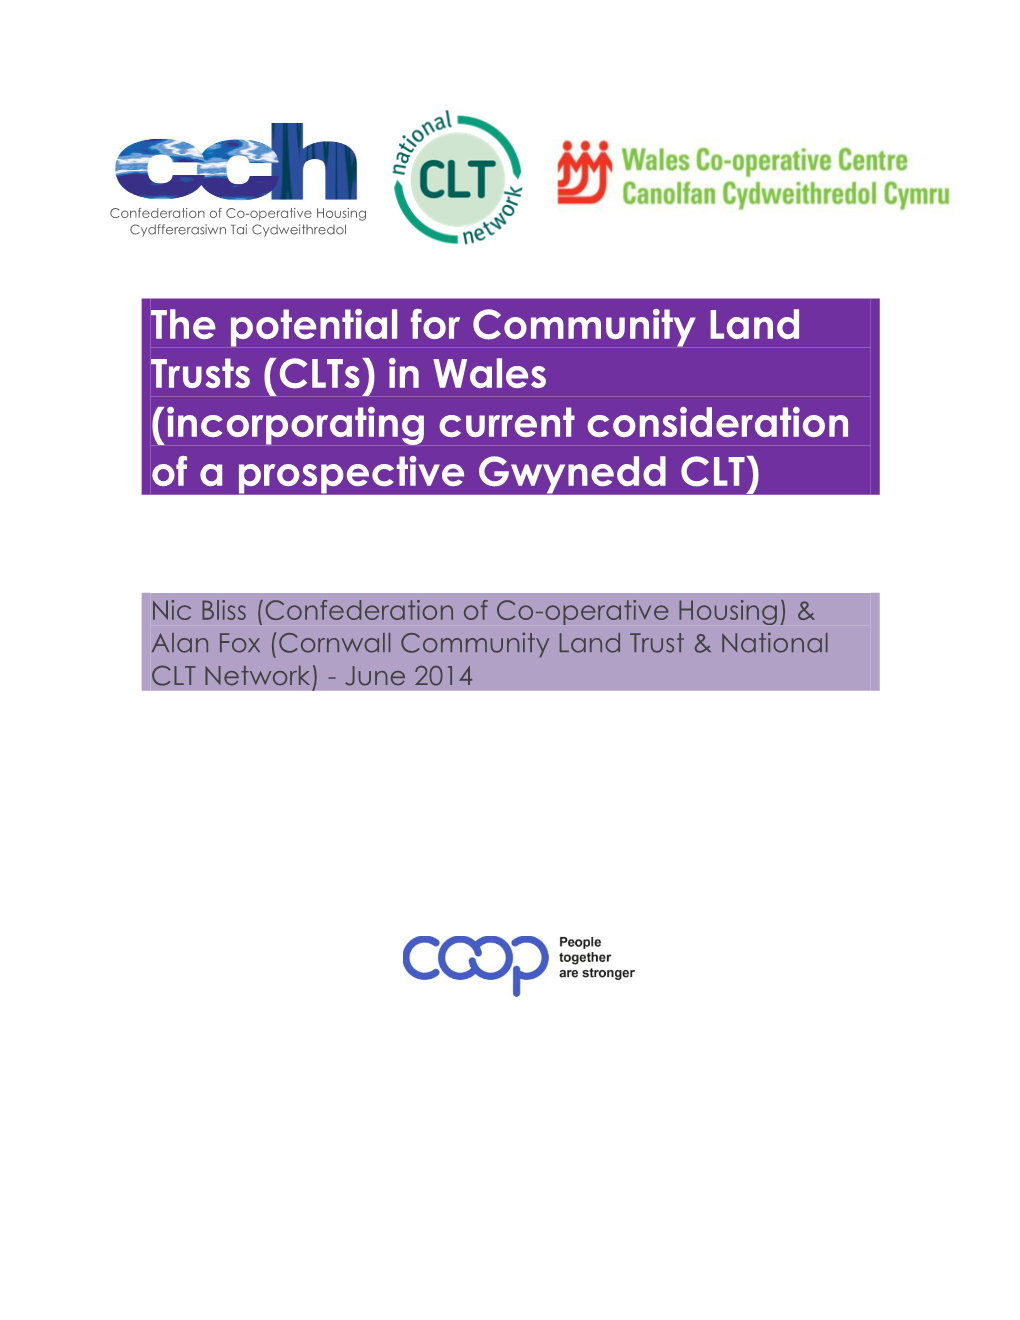 The Potential for Community Land Trusts (Clts) in Wales (Incorporating Current Consideration of a Prospective Gwynedd CLT)